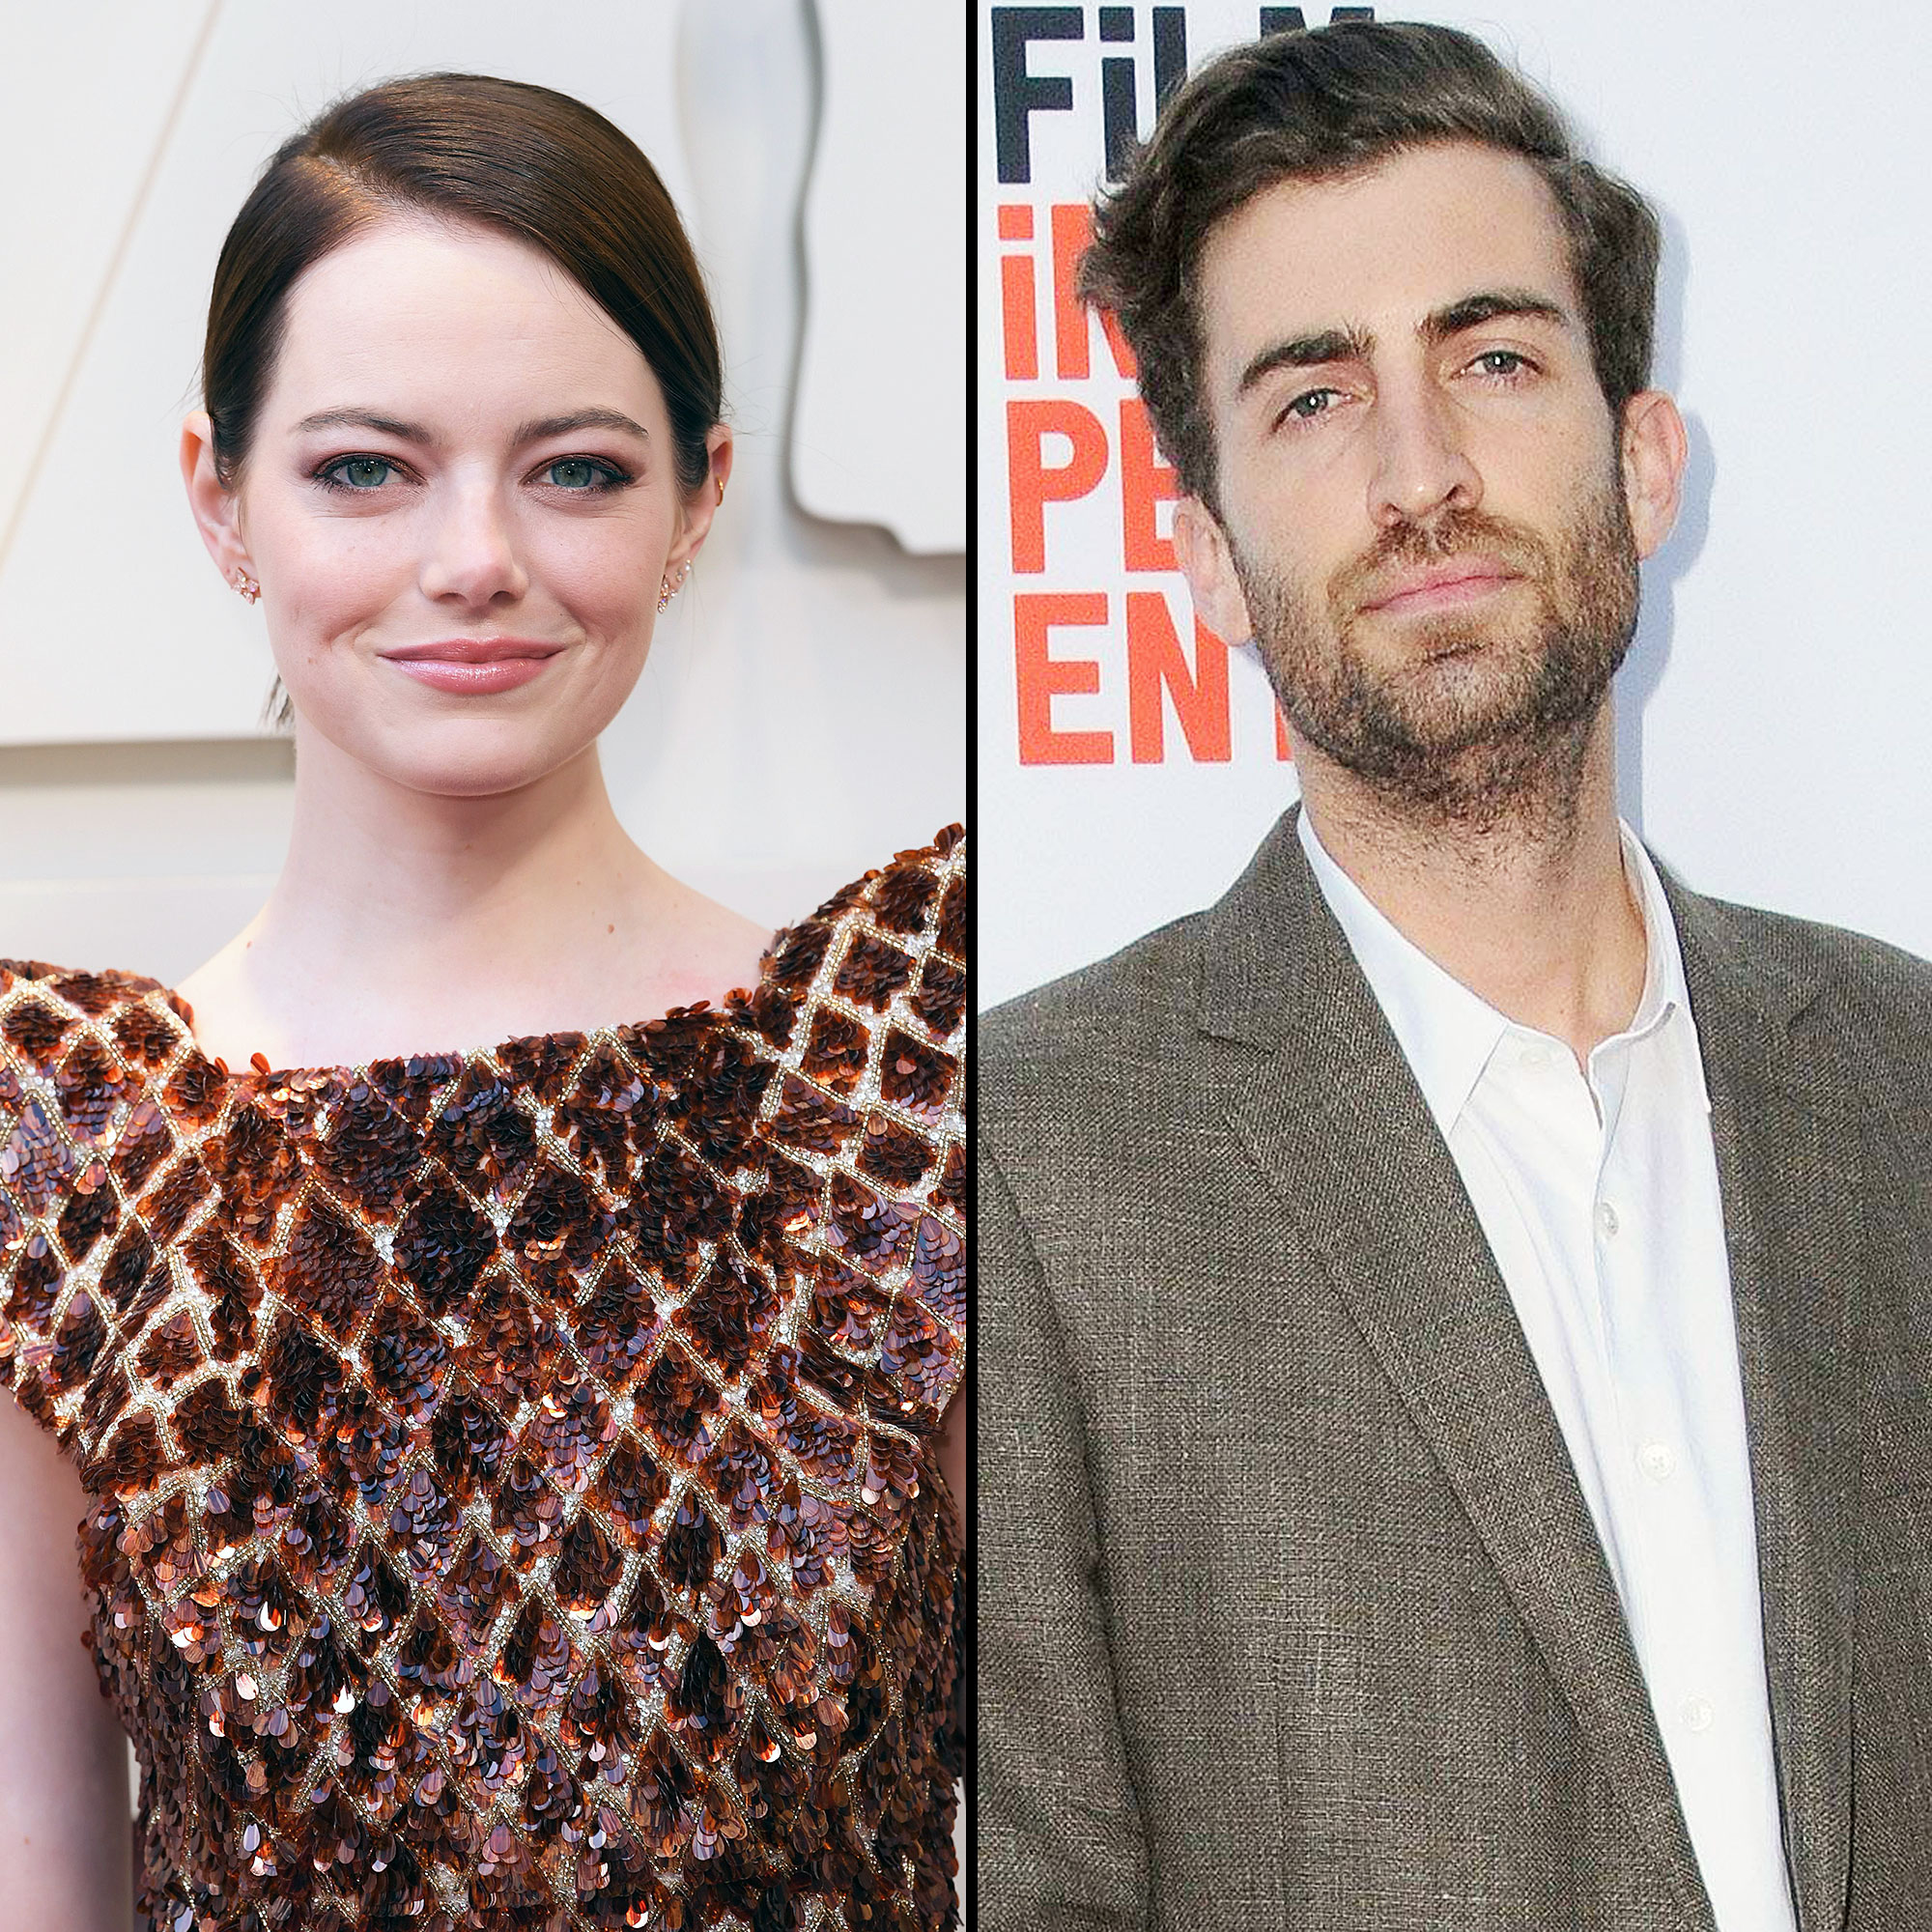 When Is Emma Stone's Wedding Date? Here's Everything We Know